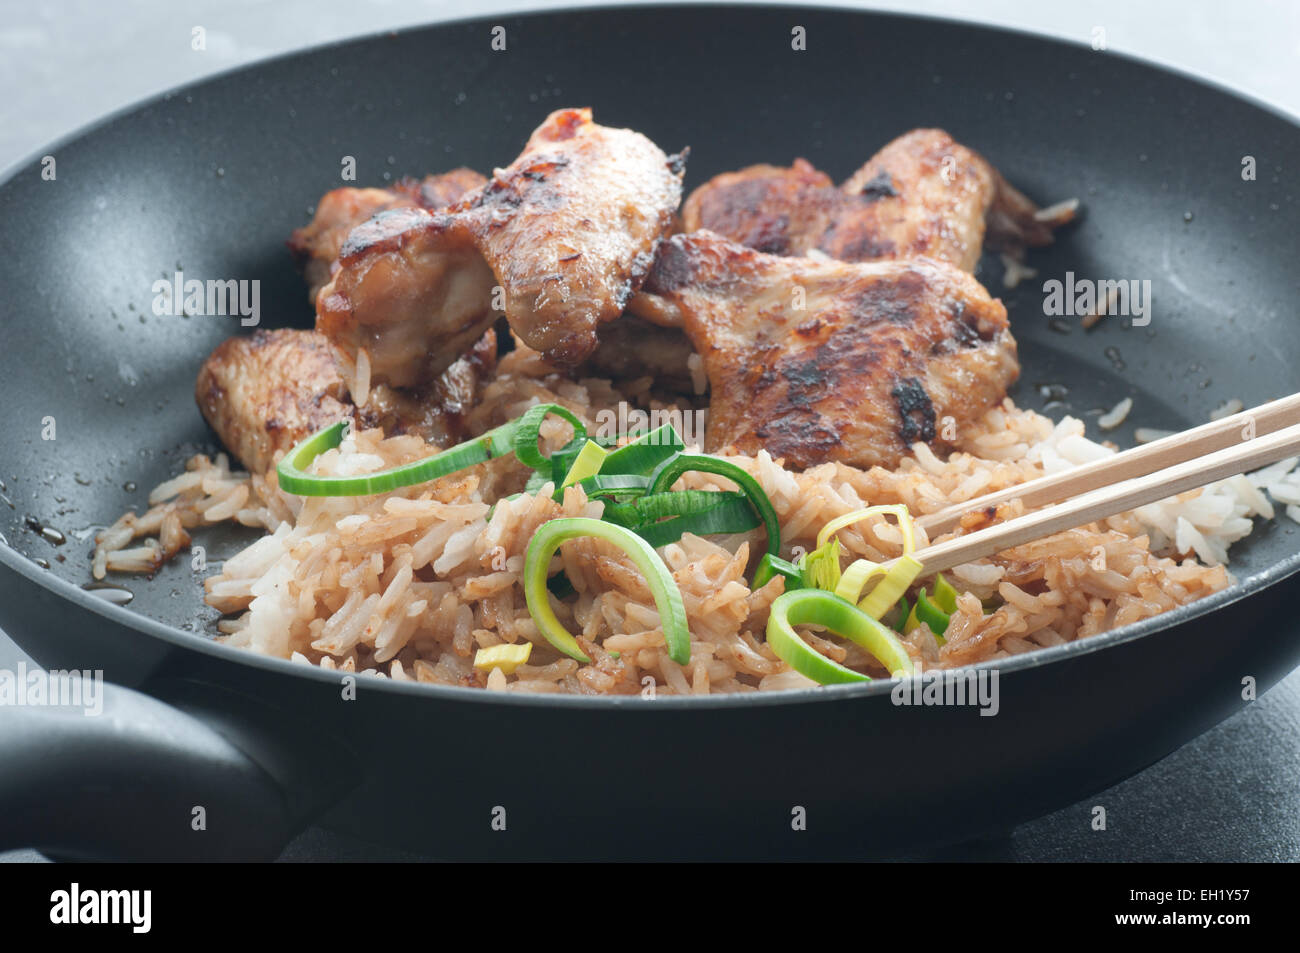 Leftovers. Fried rice with with soy sauce, barbecue chicken wings and leek in a frying pan. Stock Photo